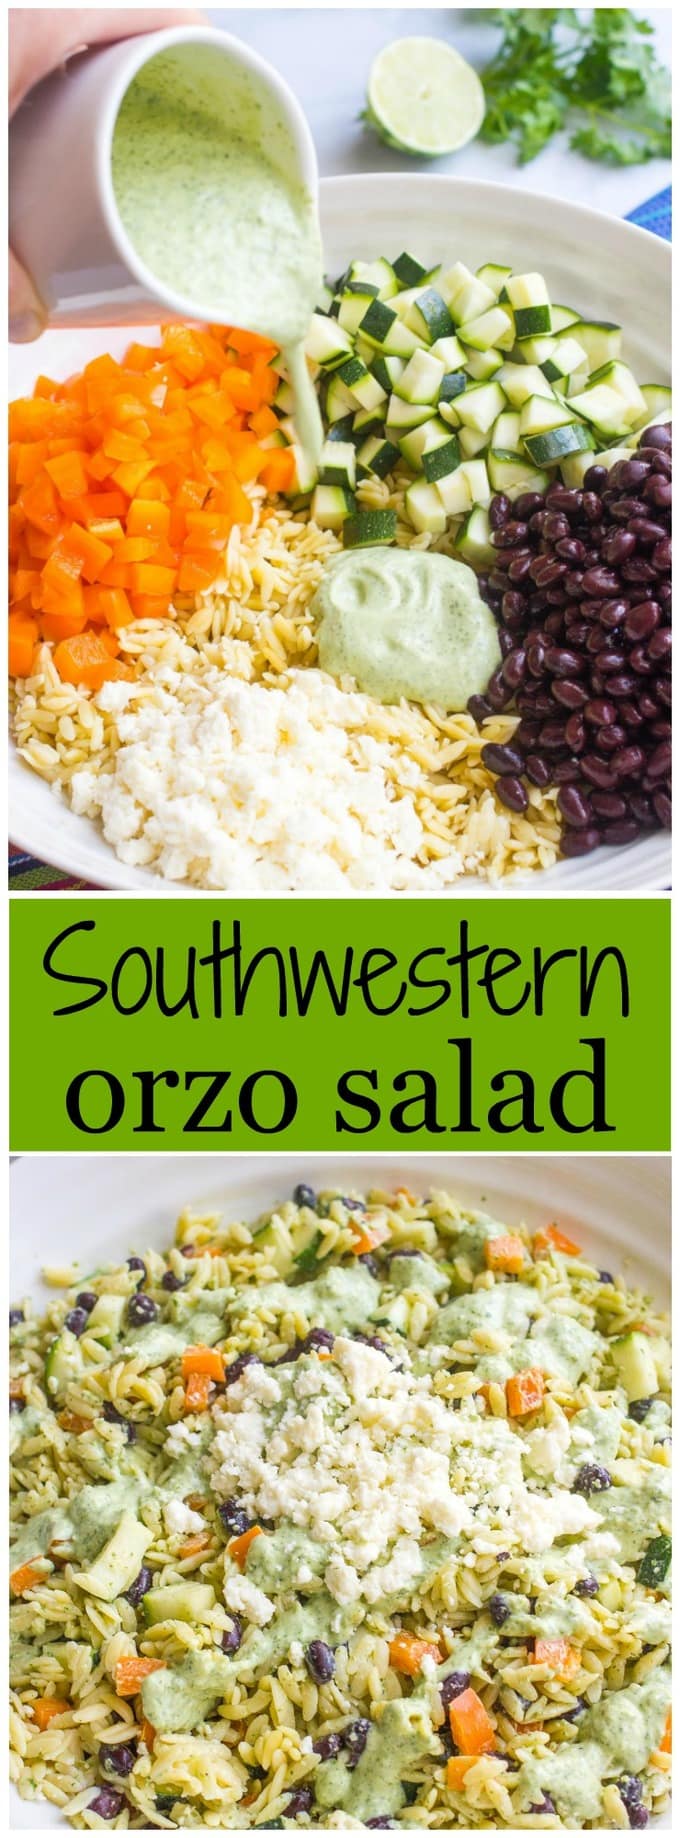 Southwestern orzo salad photo collage with a text box in the middle